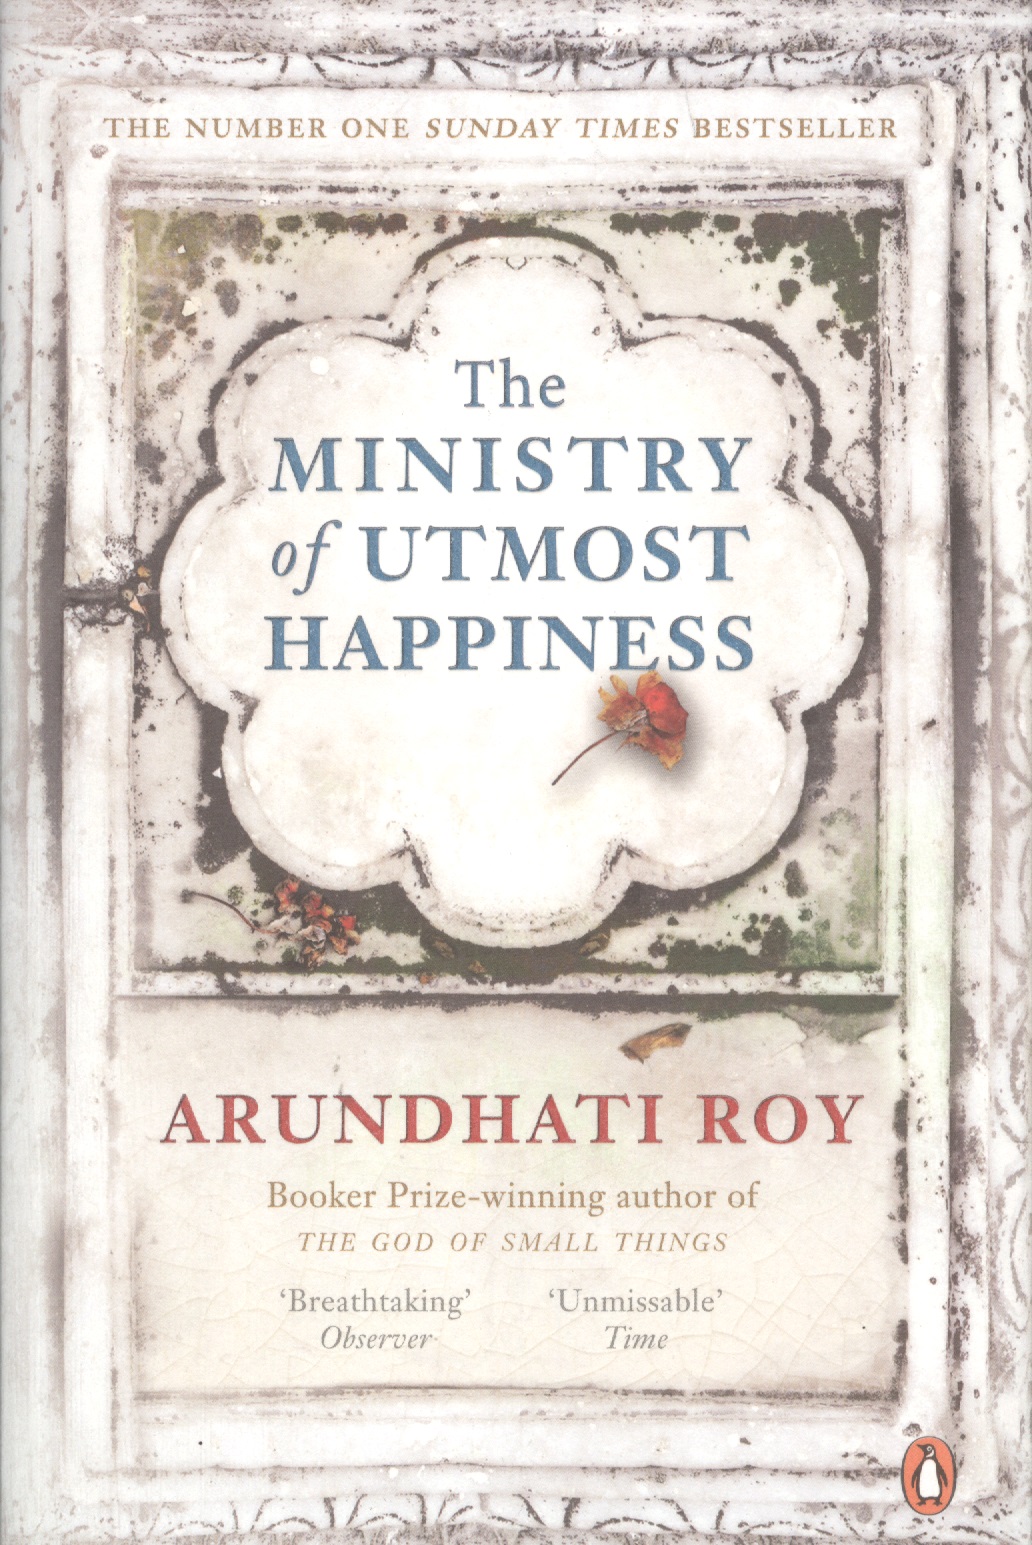 arundhati roy the ministry of utmost happiness The Ministry of Utmost Happiness